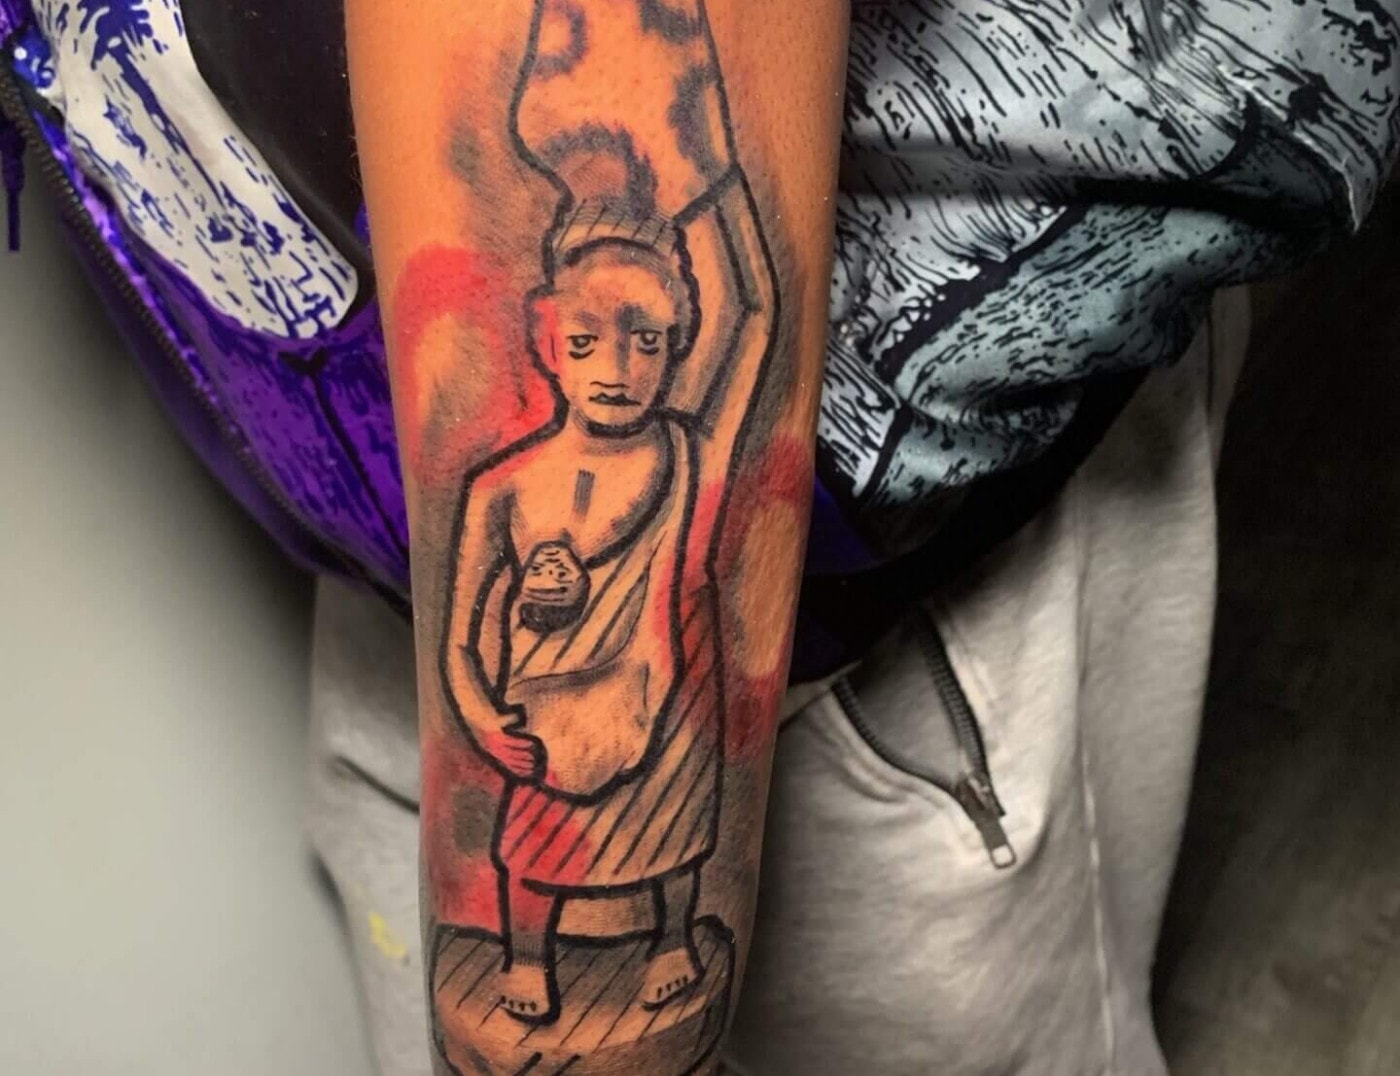 Graffro Traditional figurative tattoo designed and inked by Where's Wally of Iron Palm Tattoos in downtown Atlanta's Castleberry district. Graffro Traditional is a style invented by Wally himself. Call 404-973-7828 or stop by for a free consultation.